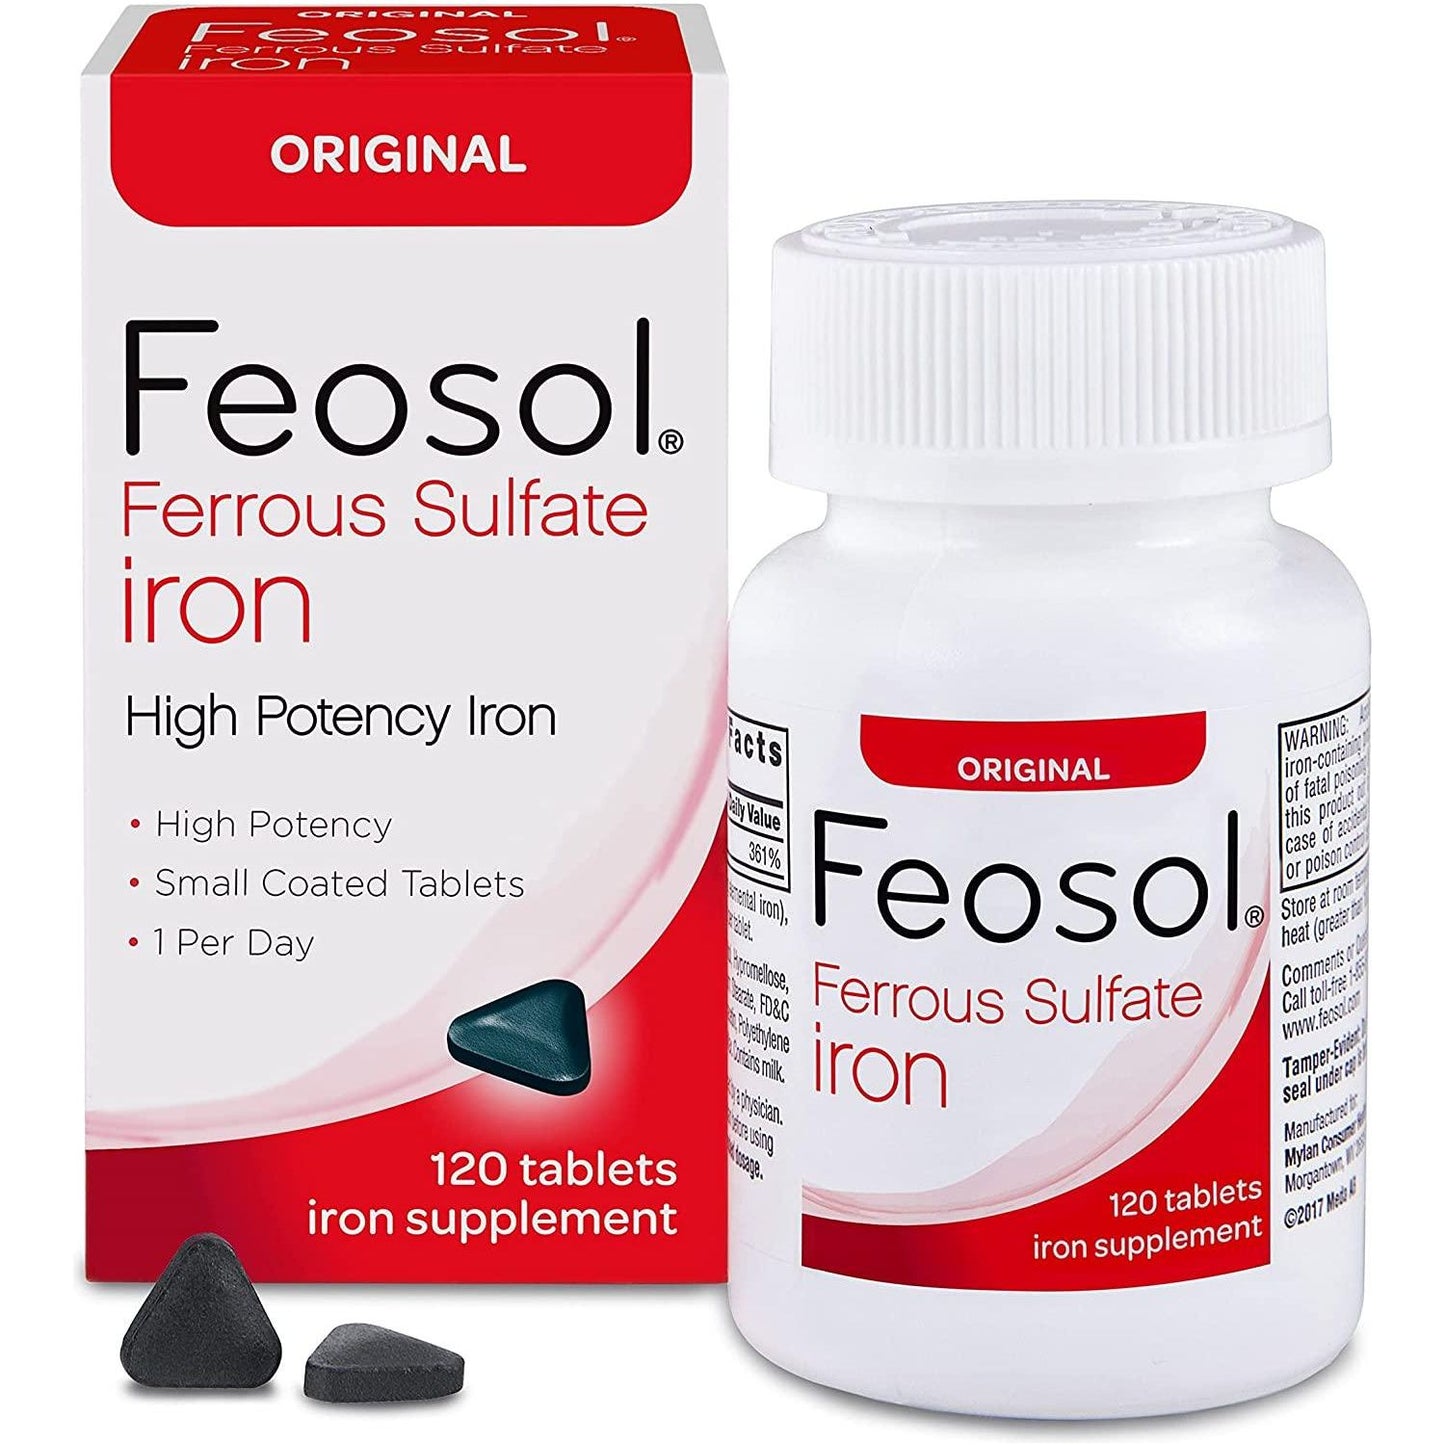 Feosol Original Iron Supplement Tablets, Non-heme iron pills, 325mg Ferrous Sulfate (65mg Elemental Iron) per Iron Pill, Iron Pills For Energy and Immune System Support - The New You Recovery Kit